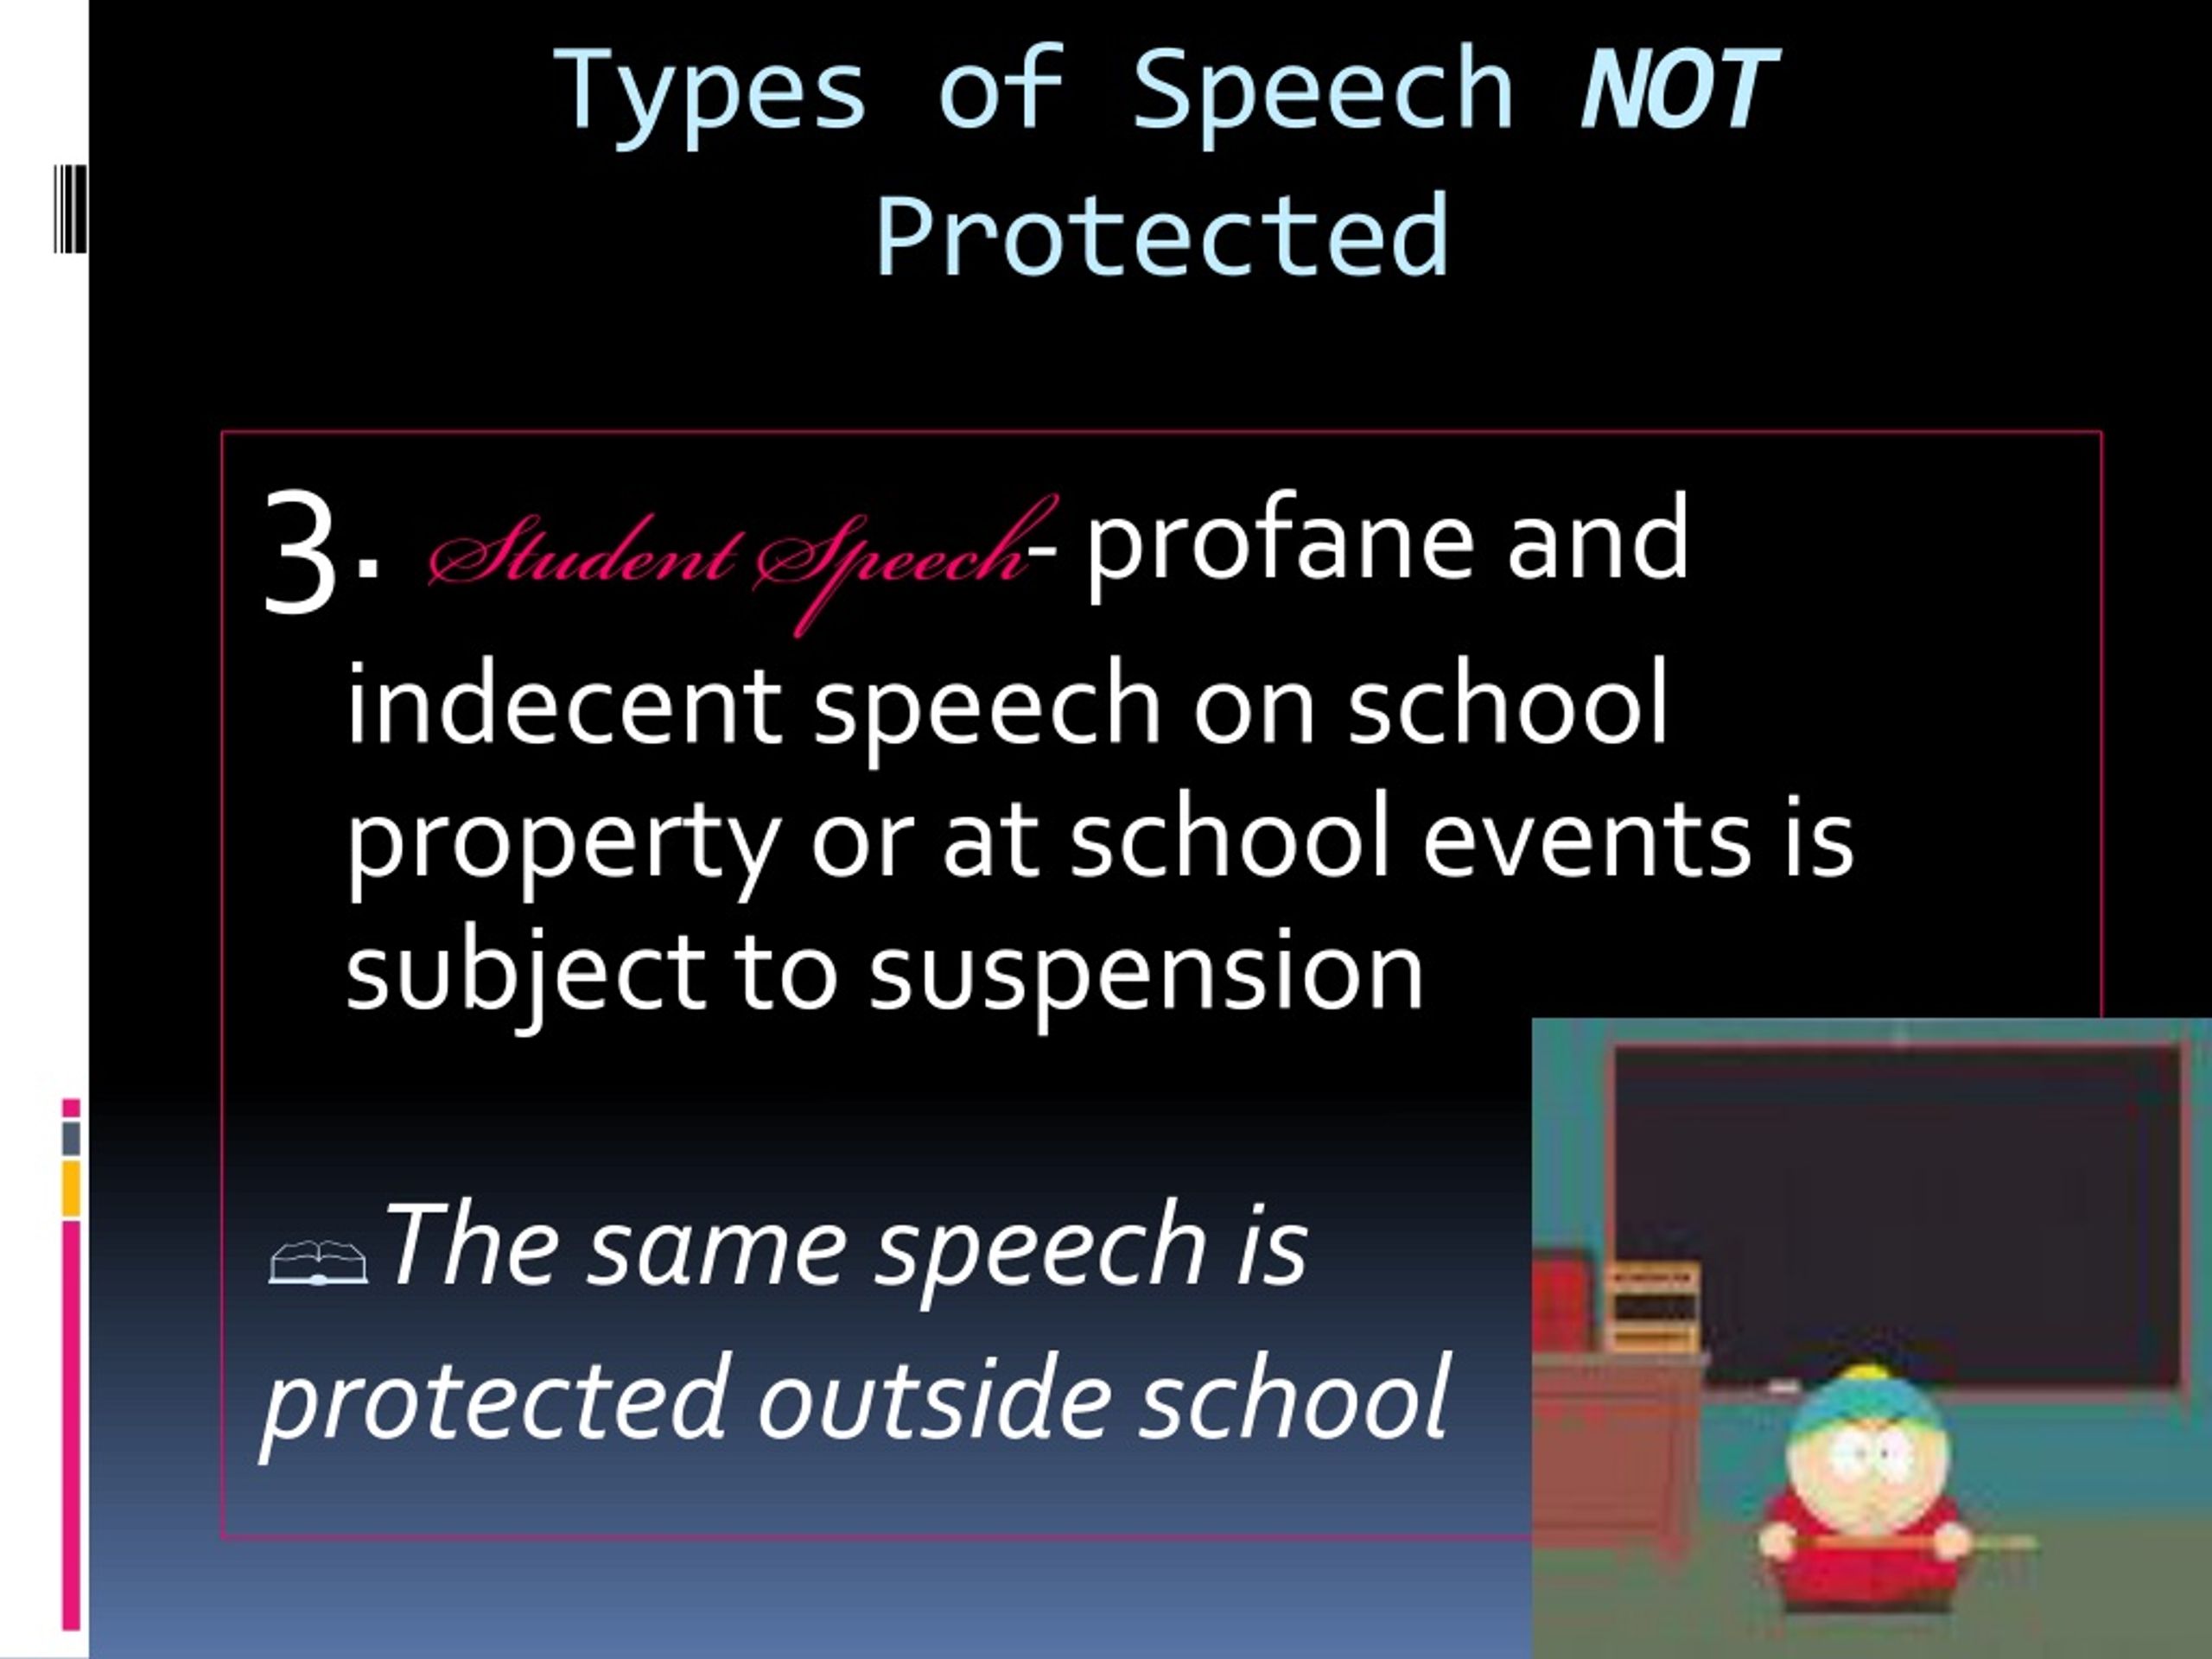 two types of speech not protected by the first amendment